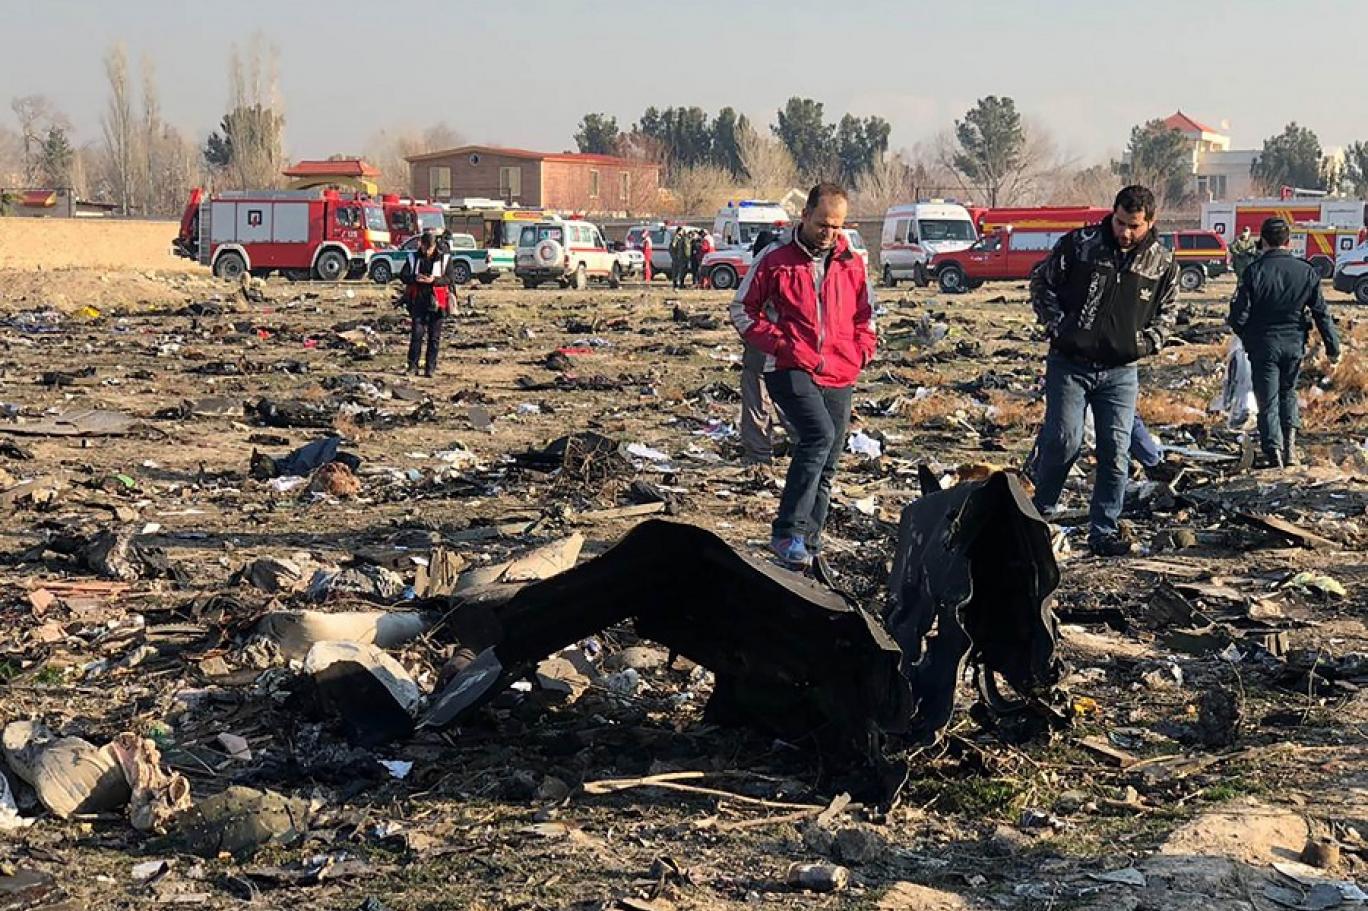 Iran sentences ten military members to prison In 2020 downing Of Ukrainian airliner that killed 176